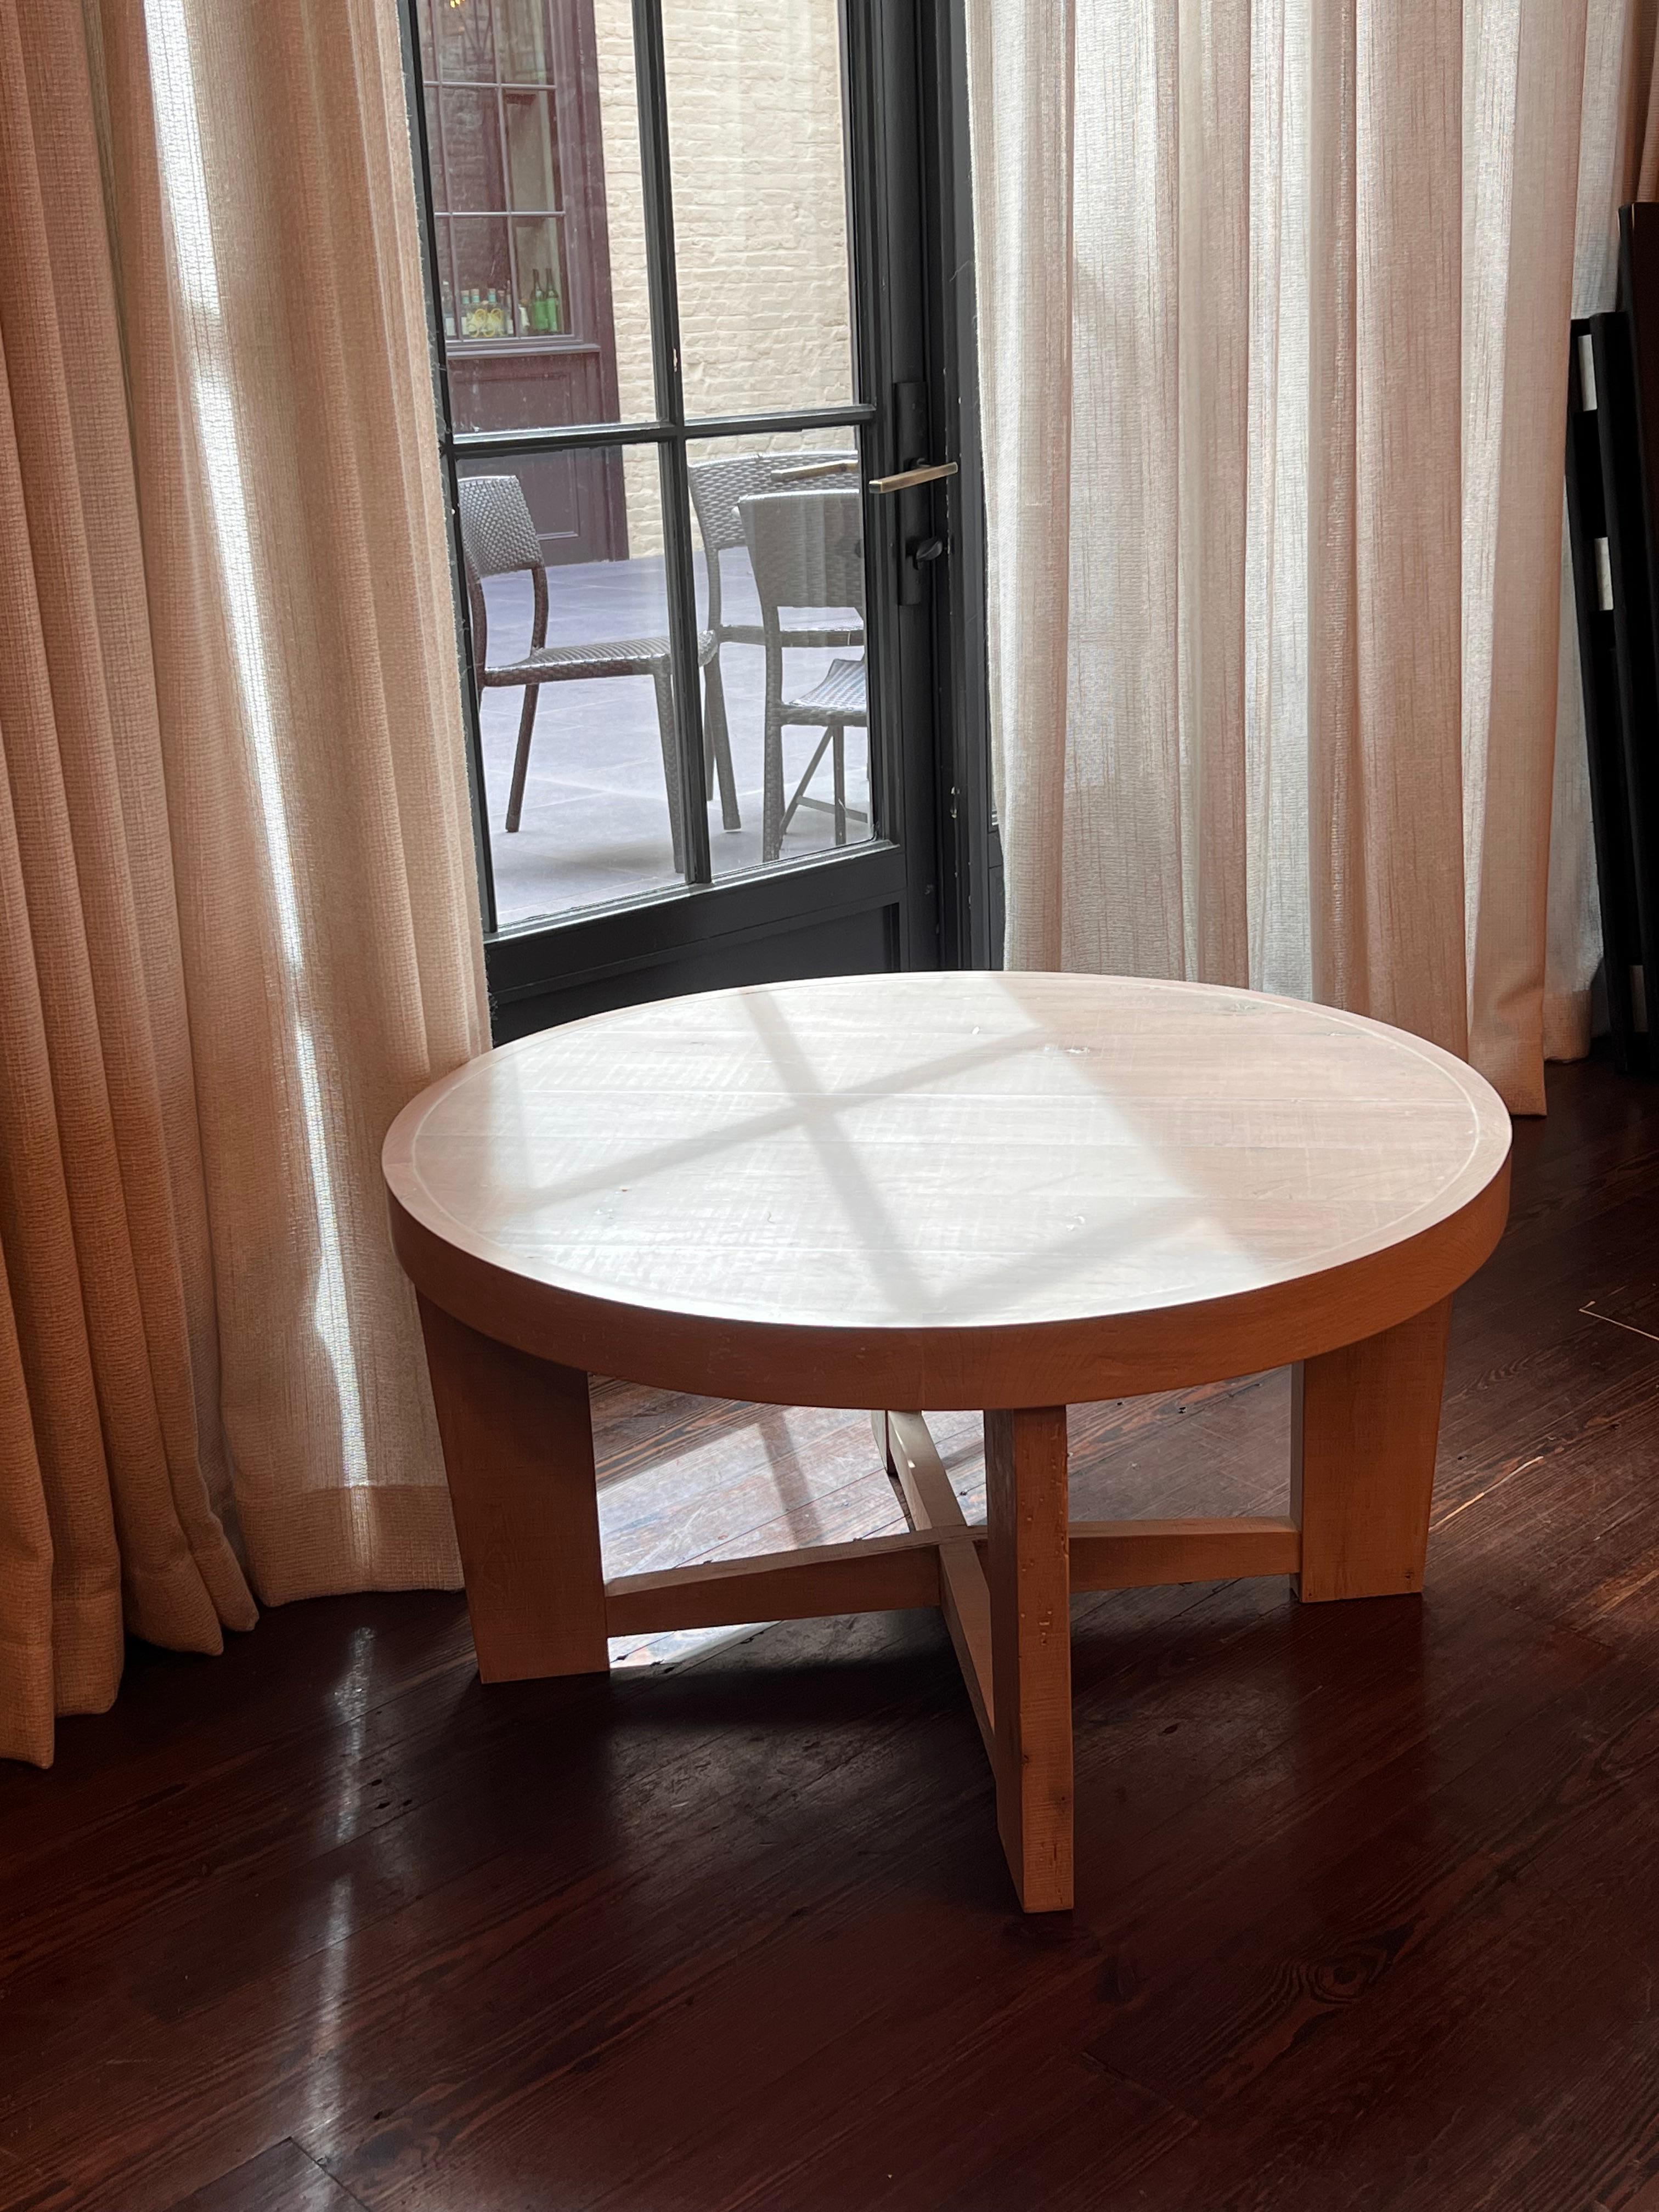  Modern Solid White Oak Handmade Coffee Table In Excellent Condition For Sale In Montgomery, AL